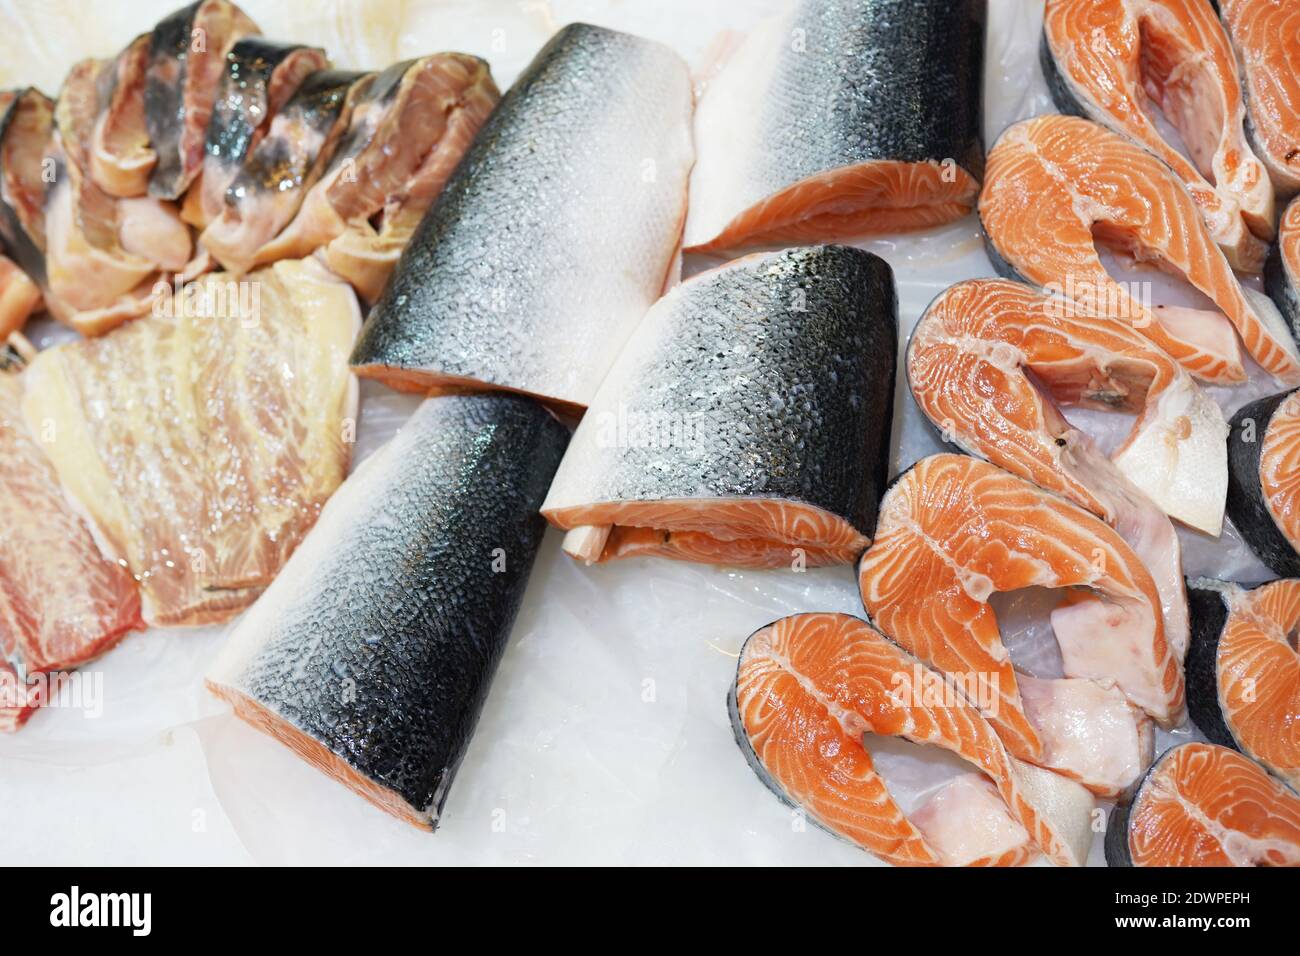 Salmon on cooled market display, tm's removed from price tags Stock Photo